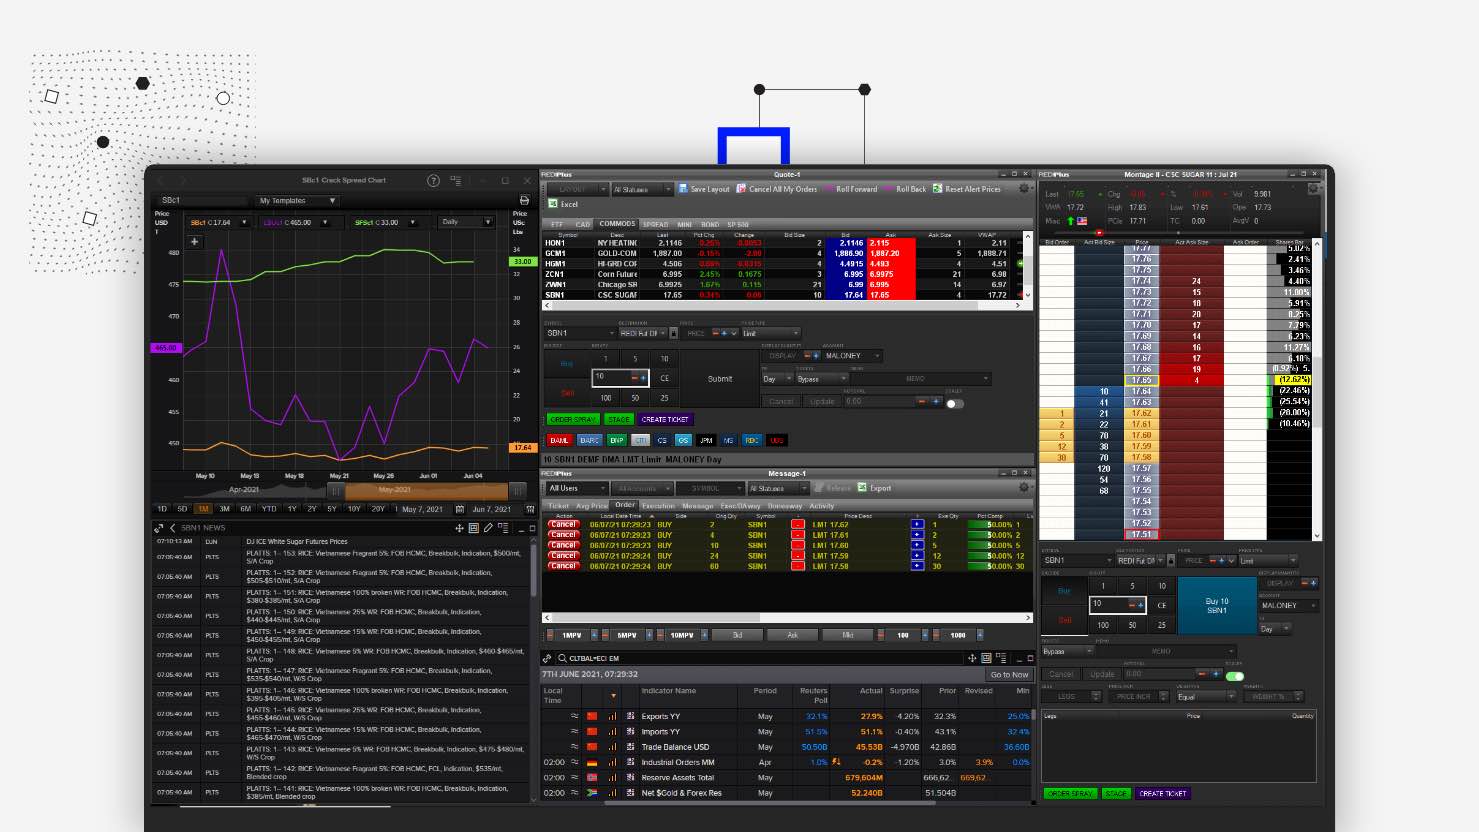 A screenshot of the Eikon dashboard showing integration with trade execution capabilities